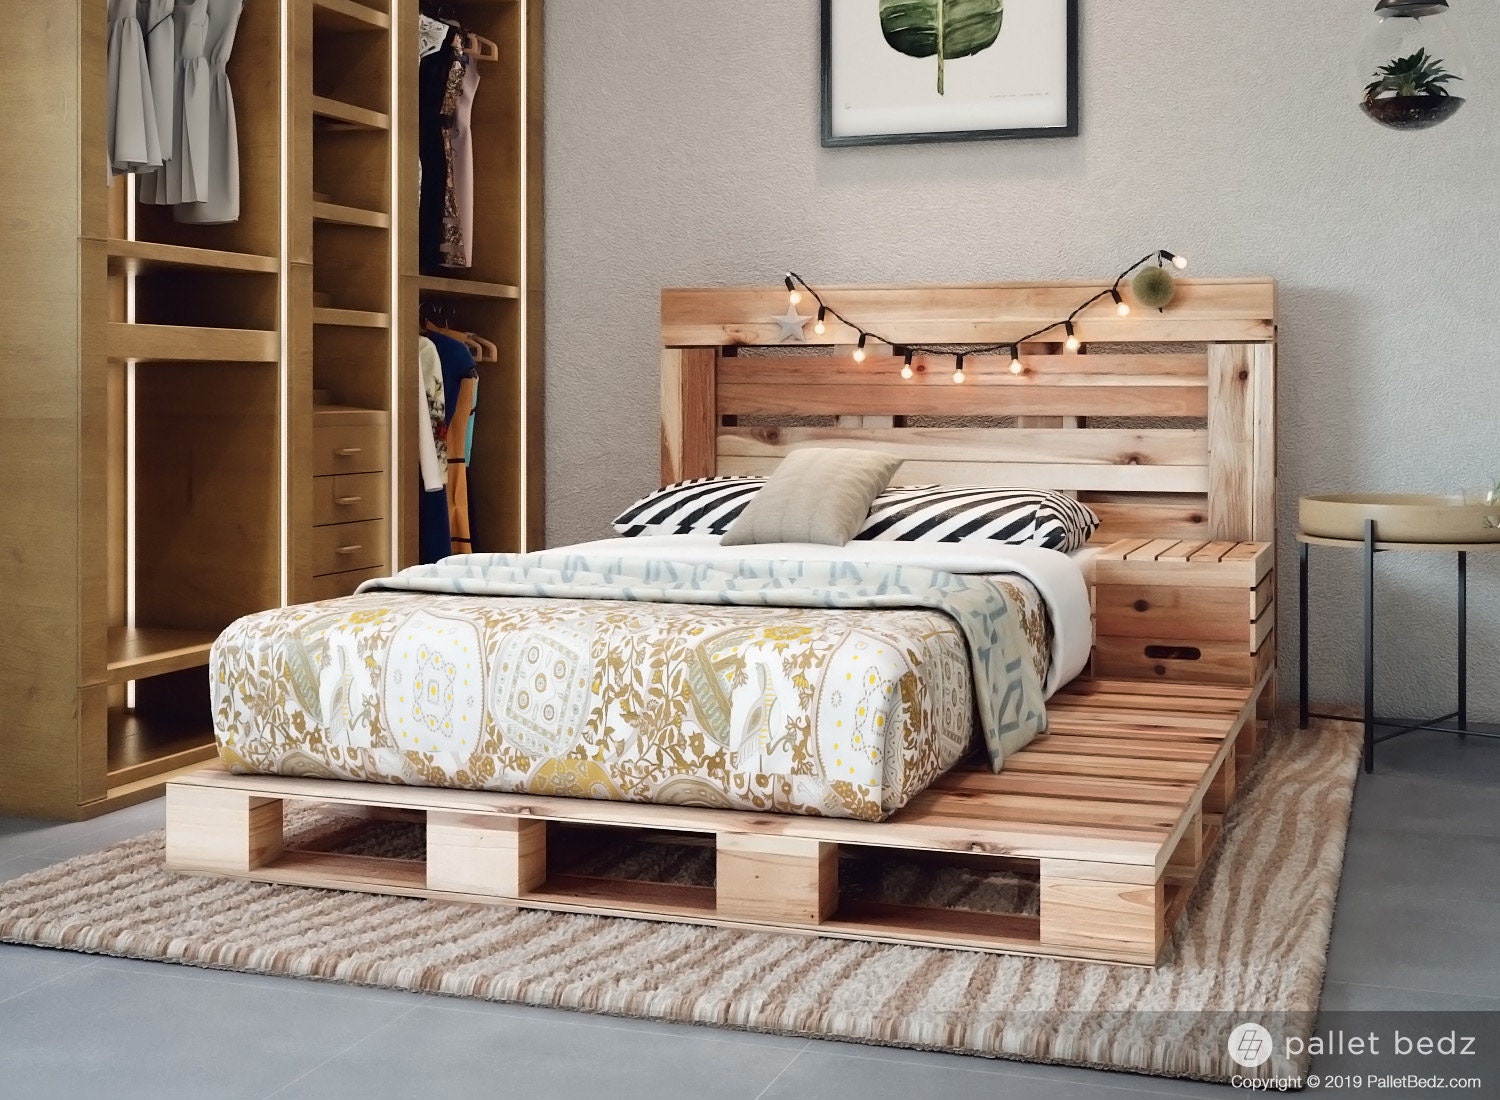 Pallet Bed The Twin Size Includes, Twin Bed Pallet Headboard